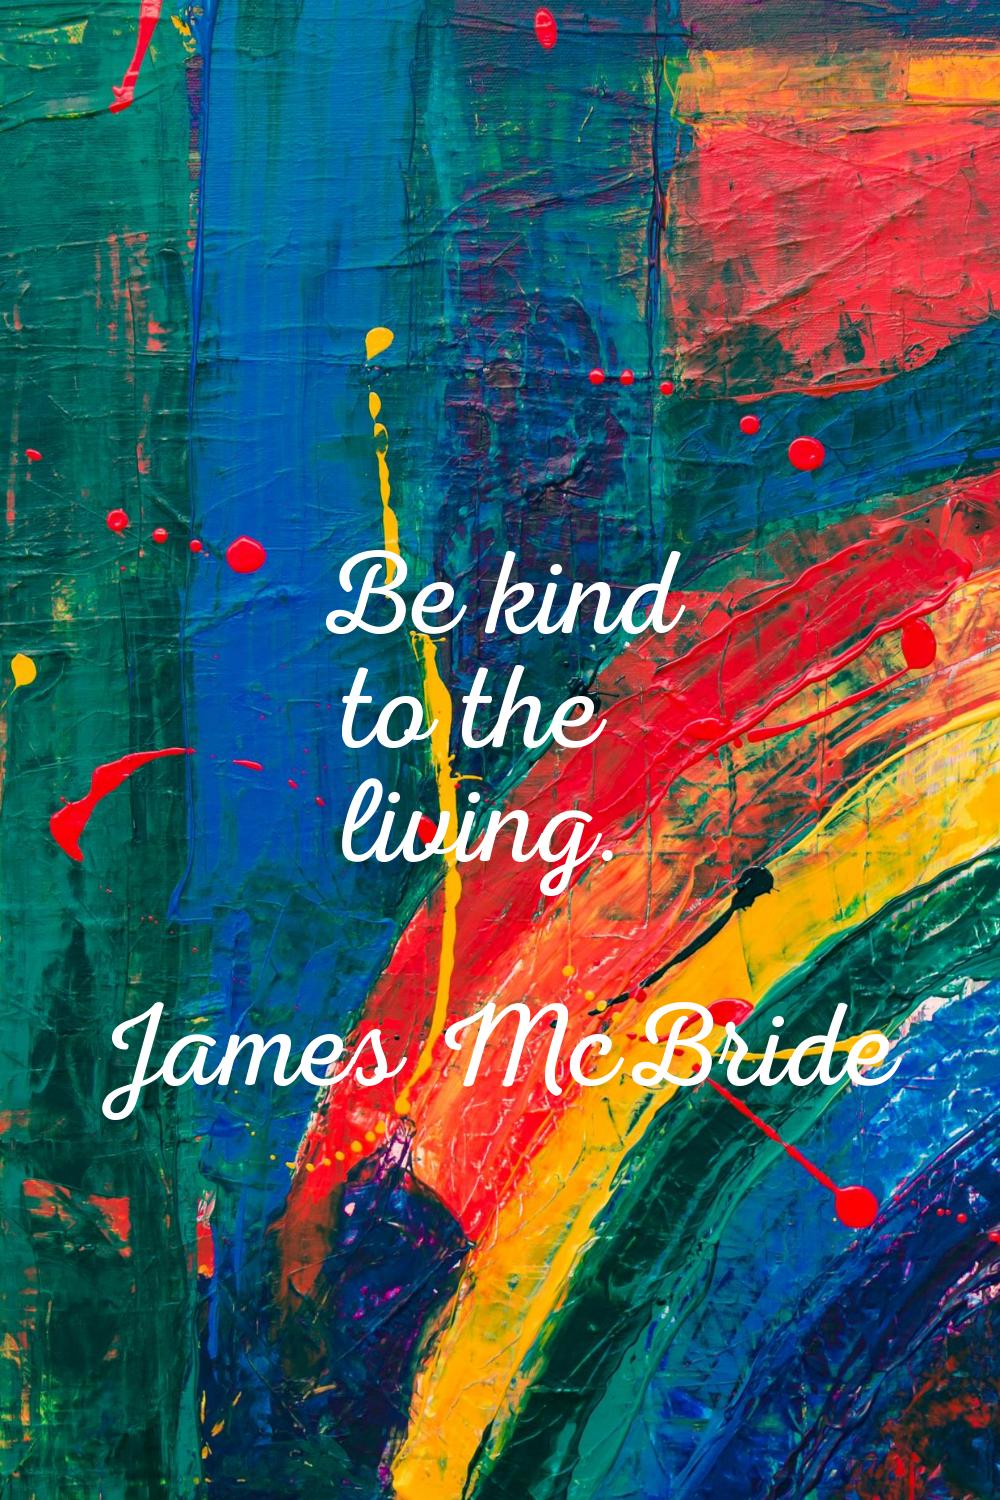 Be kind to the living.